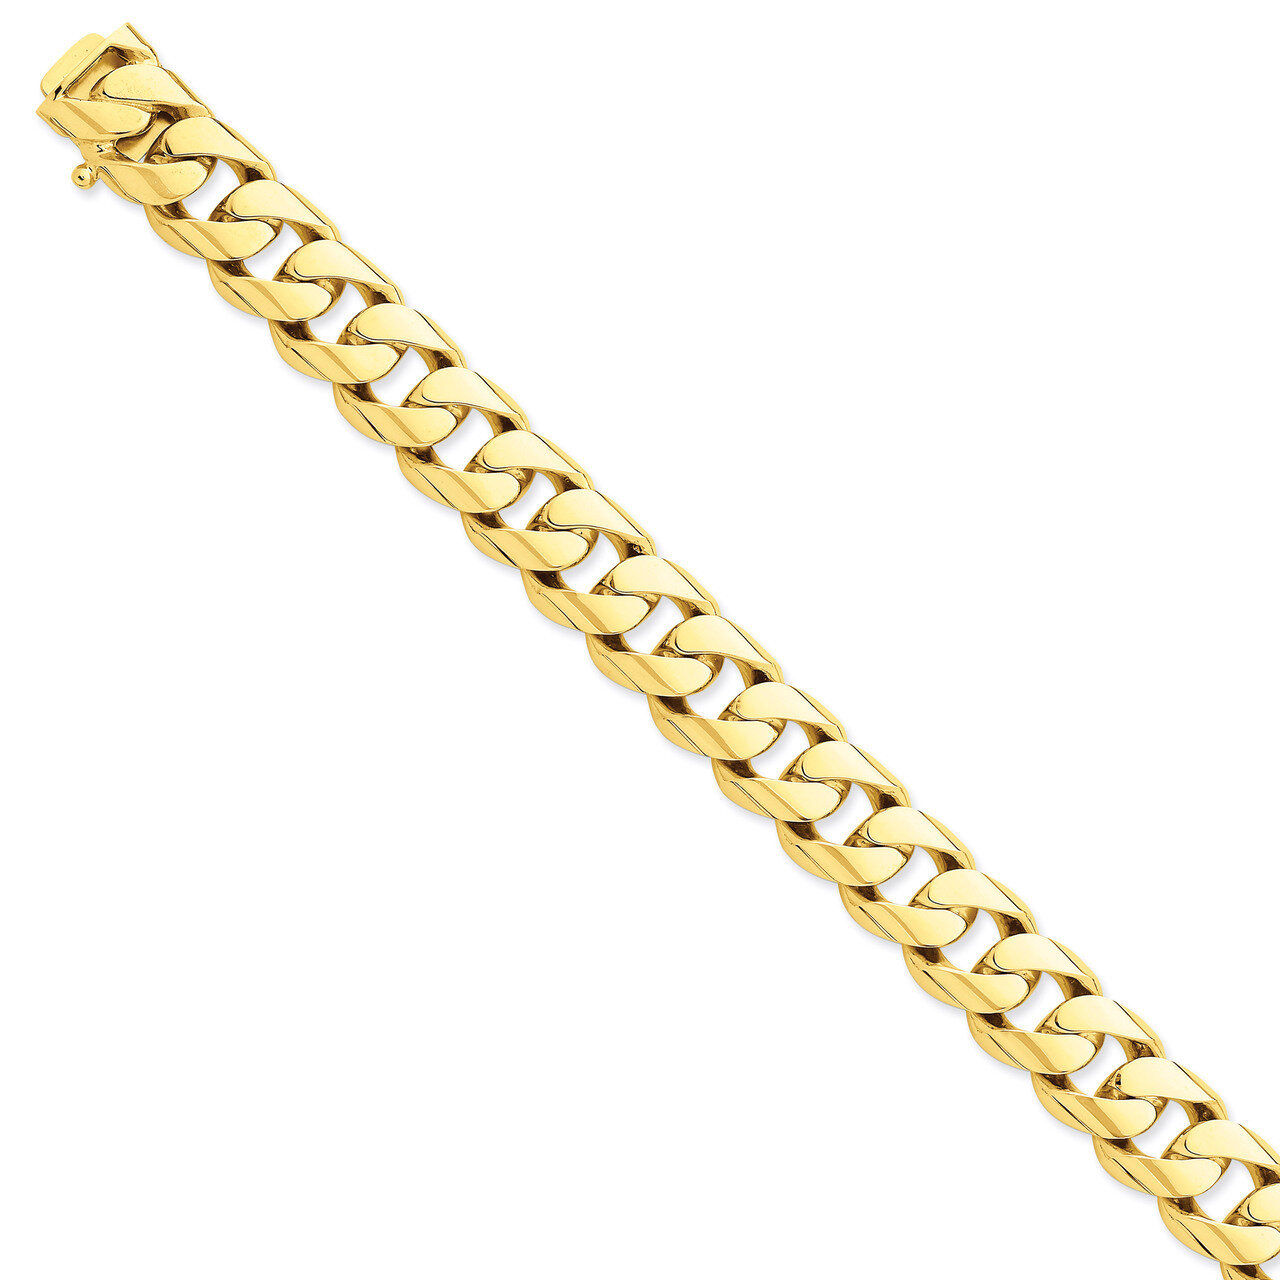 13mm Hand-polished Rounded Curb Link Chain 22 Inch 14k Gold LK128-22